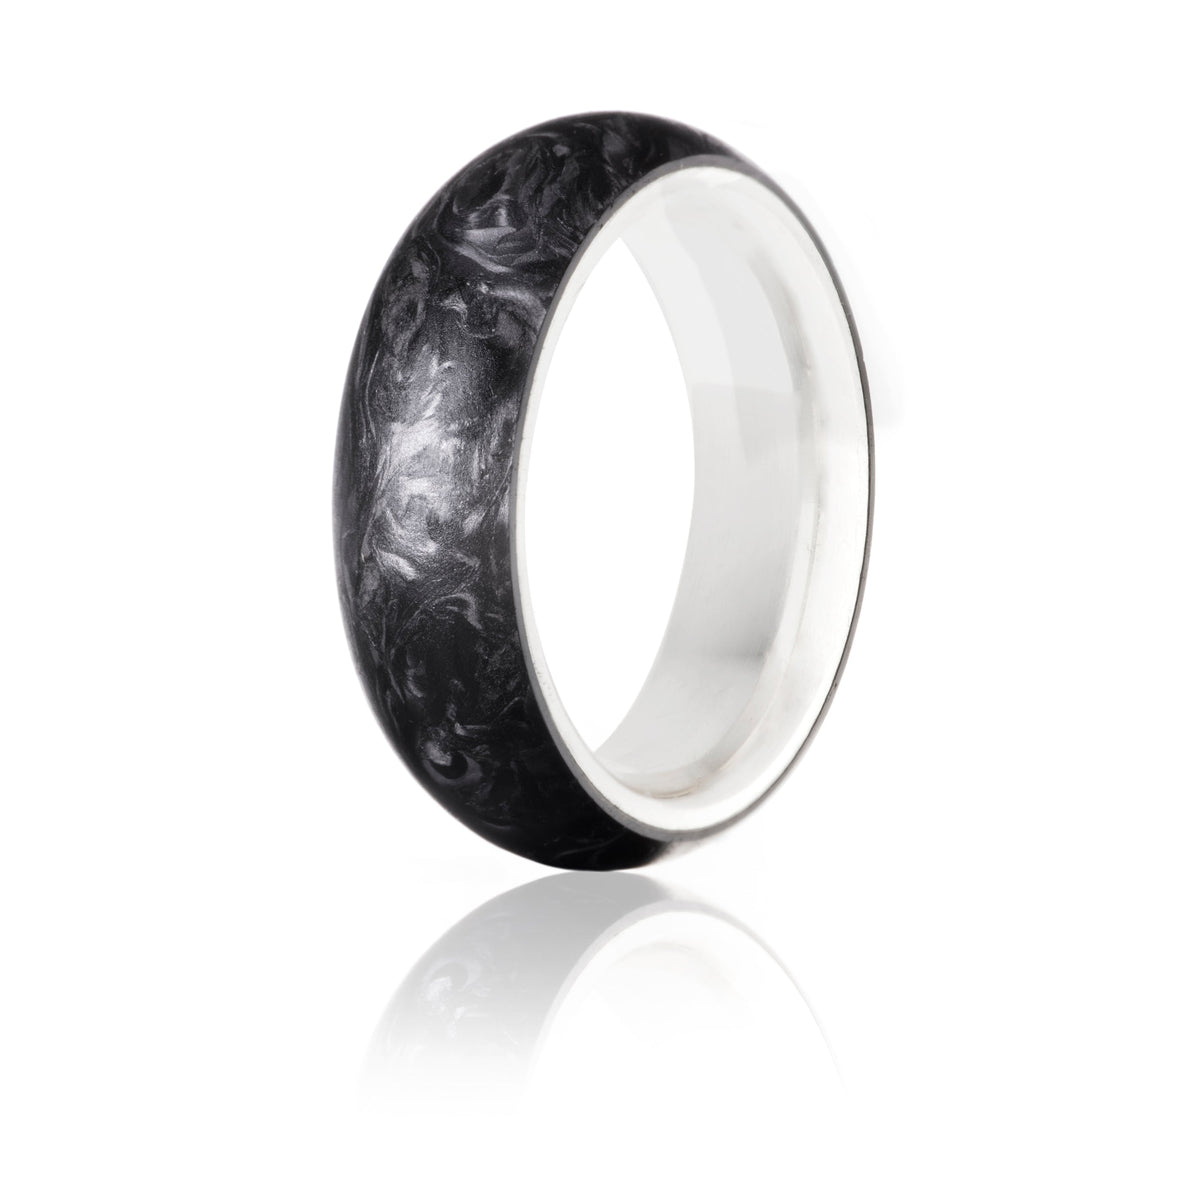 Forged Carbon radius ring with white gold interior.